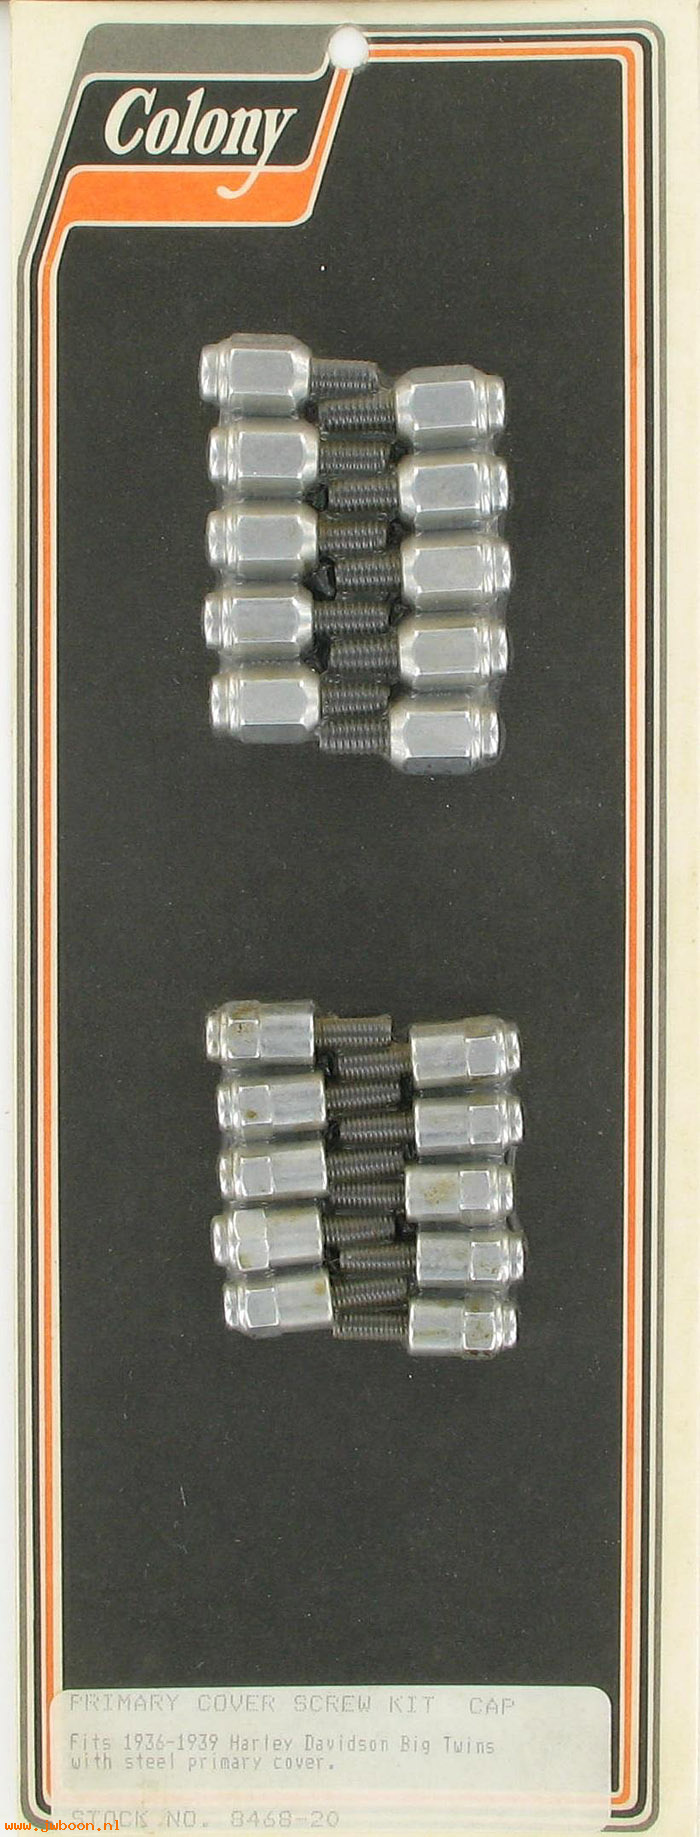 C 8468-20 (): Primary cover screw kit - Big Twins '36-'64. Colony in stock